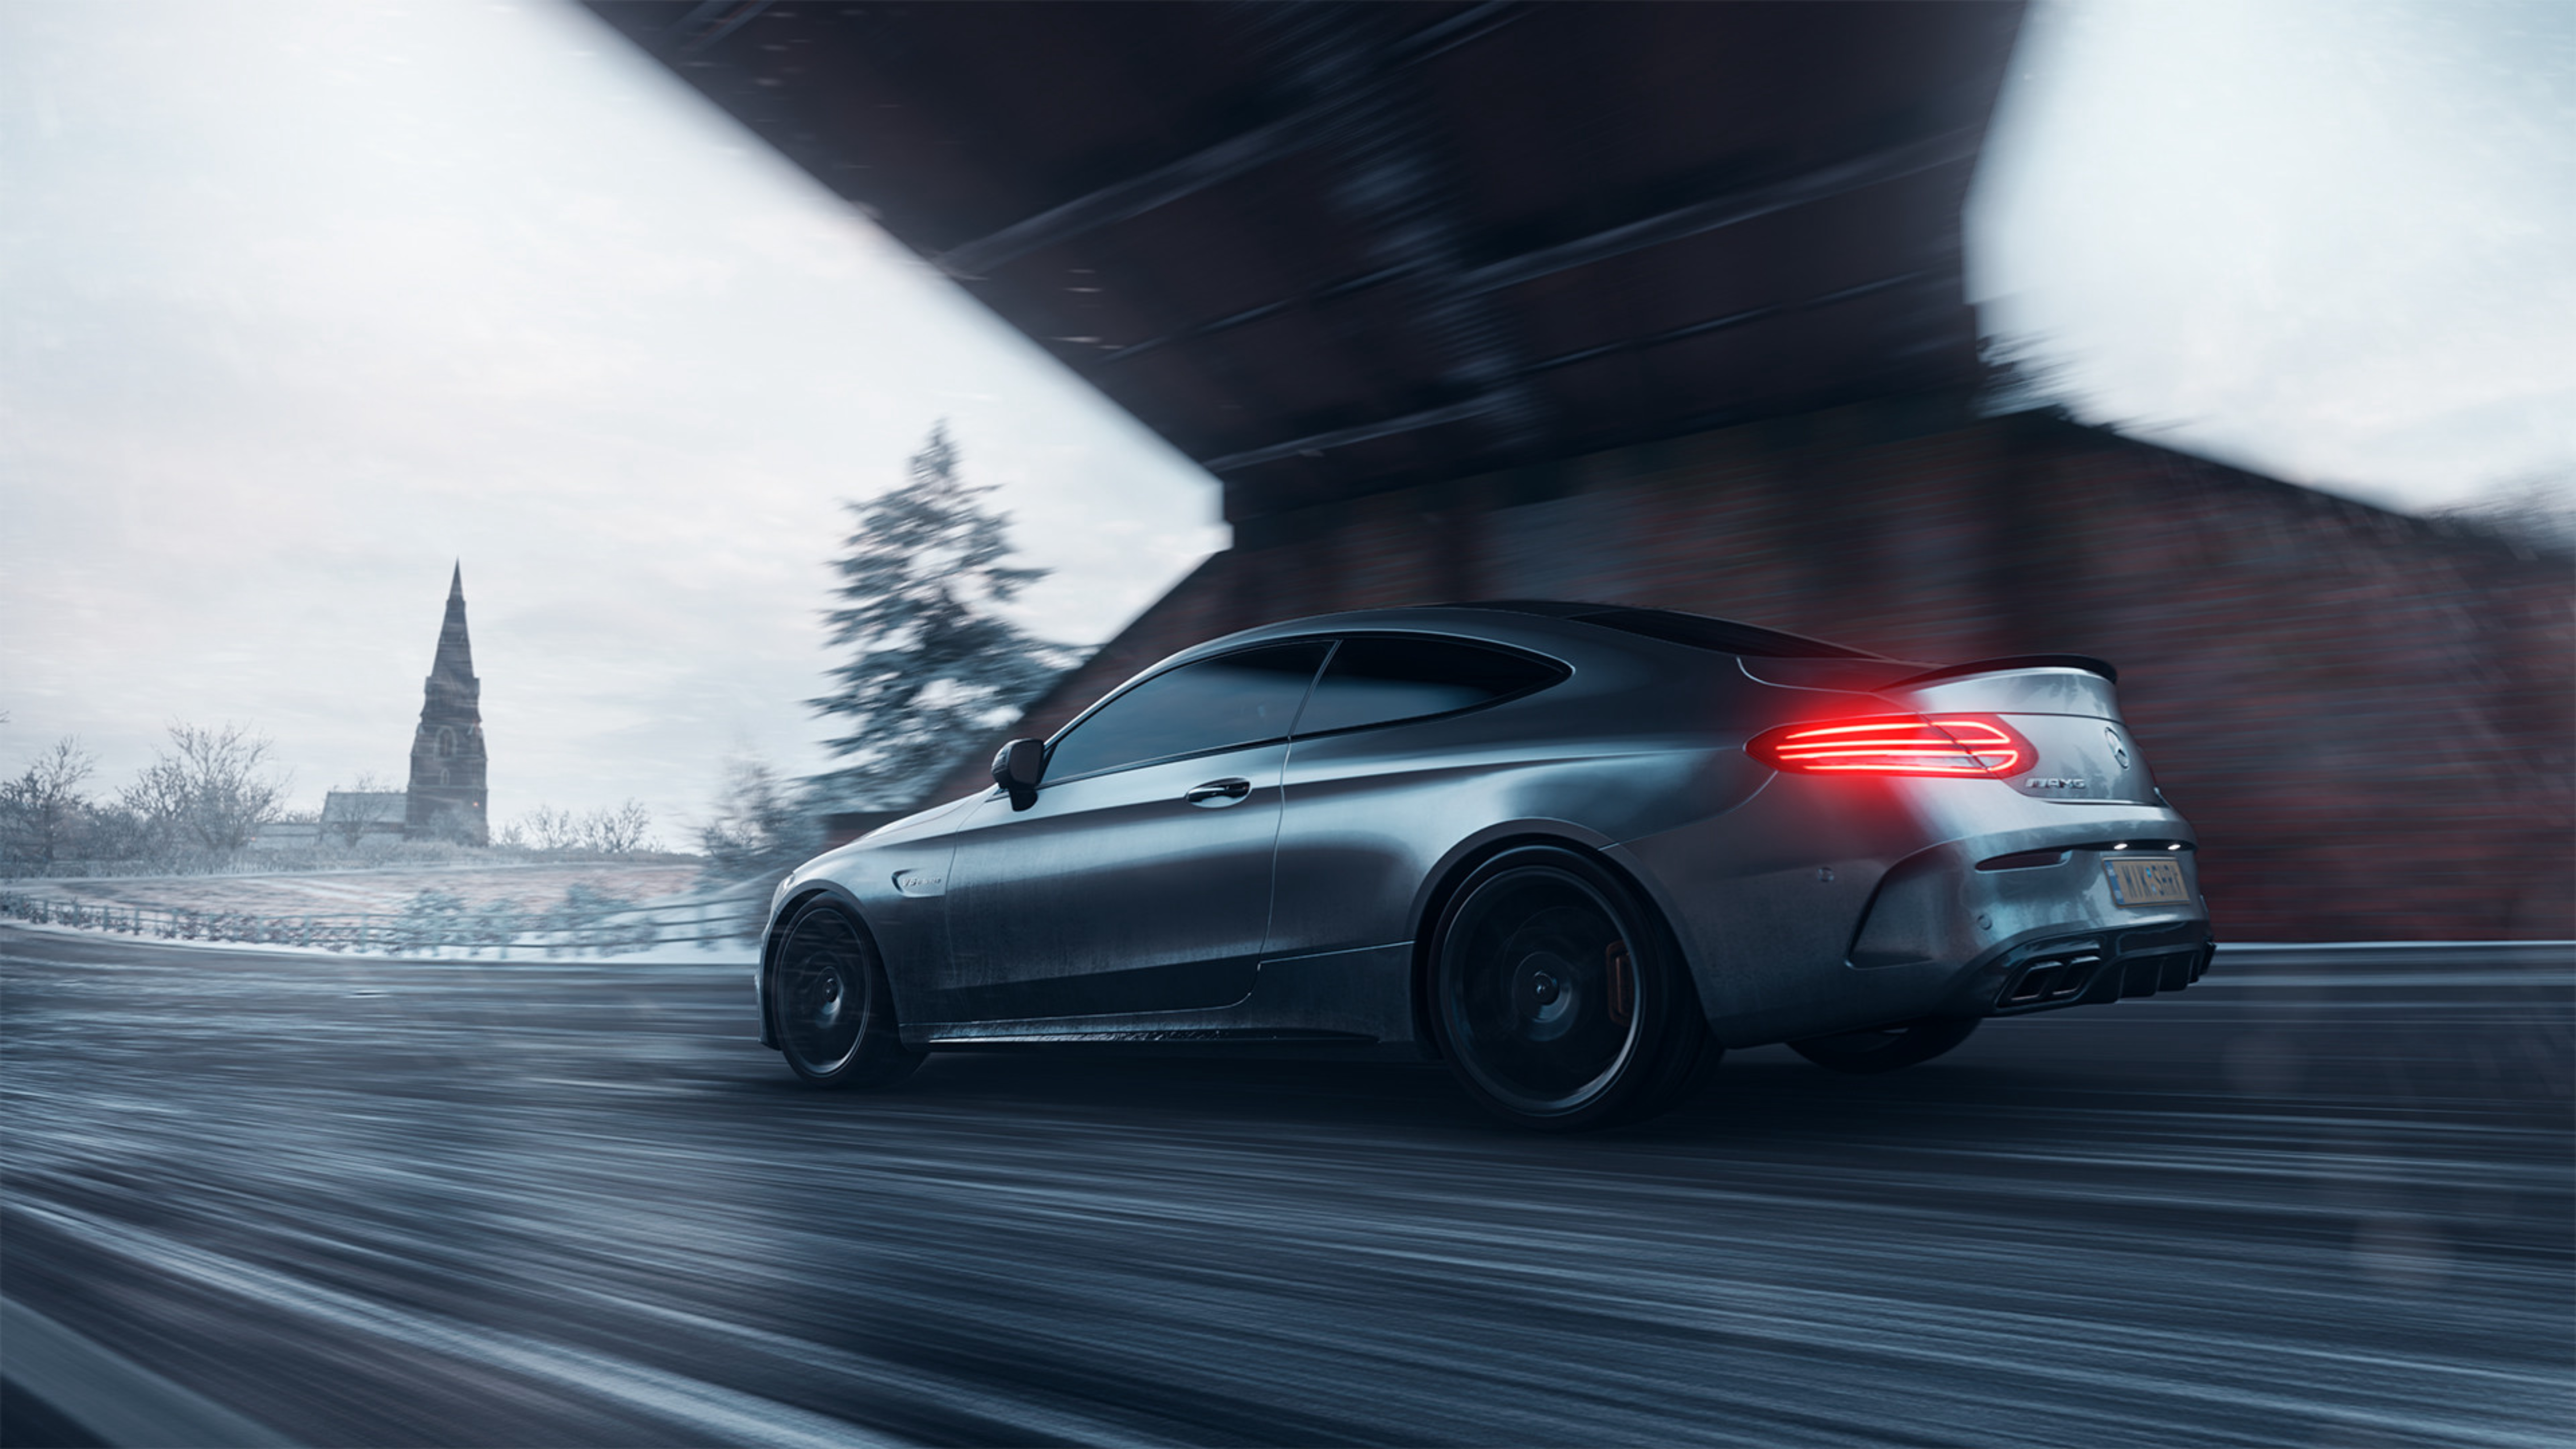 mercedes amg c63s, grey, sports car, sports, cars, side view, speed, mercedes, track, route